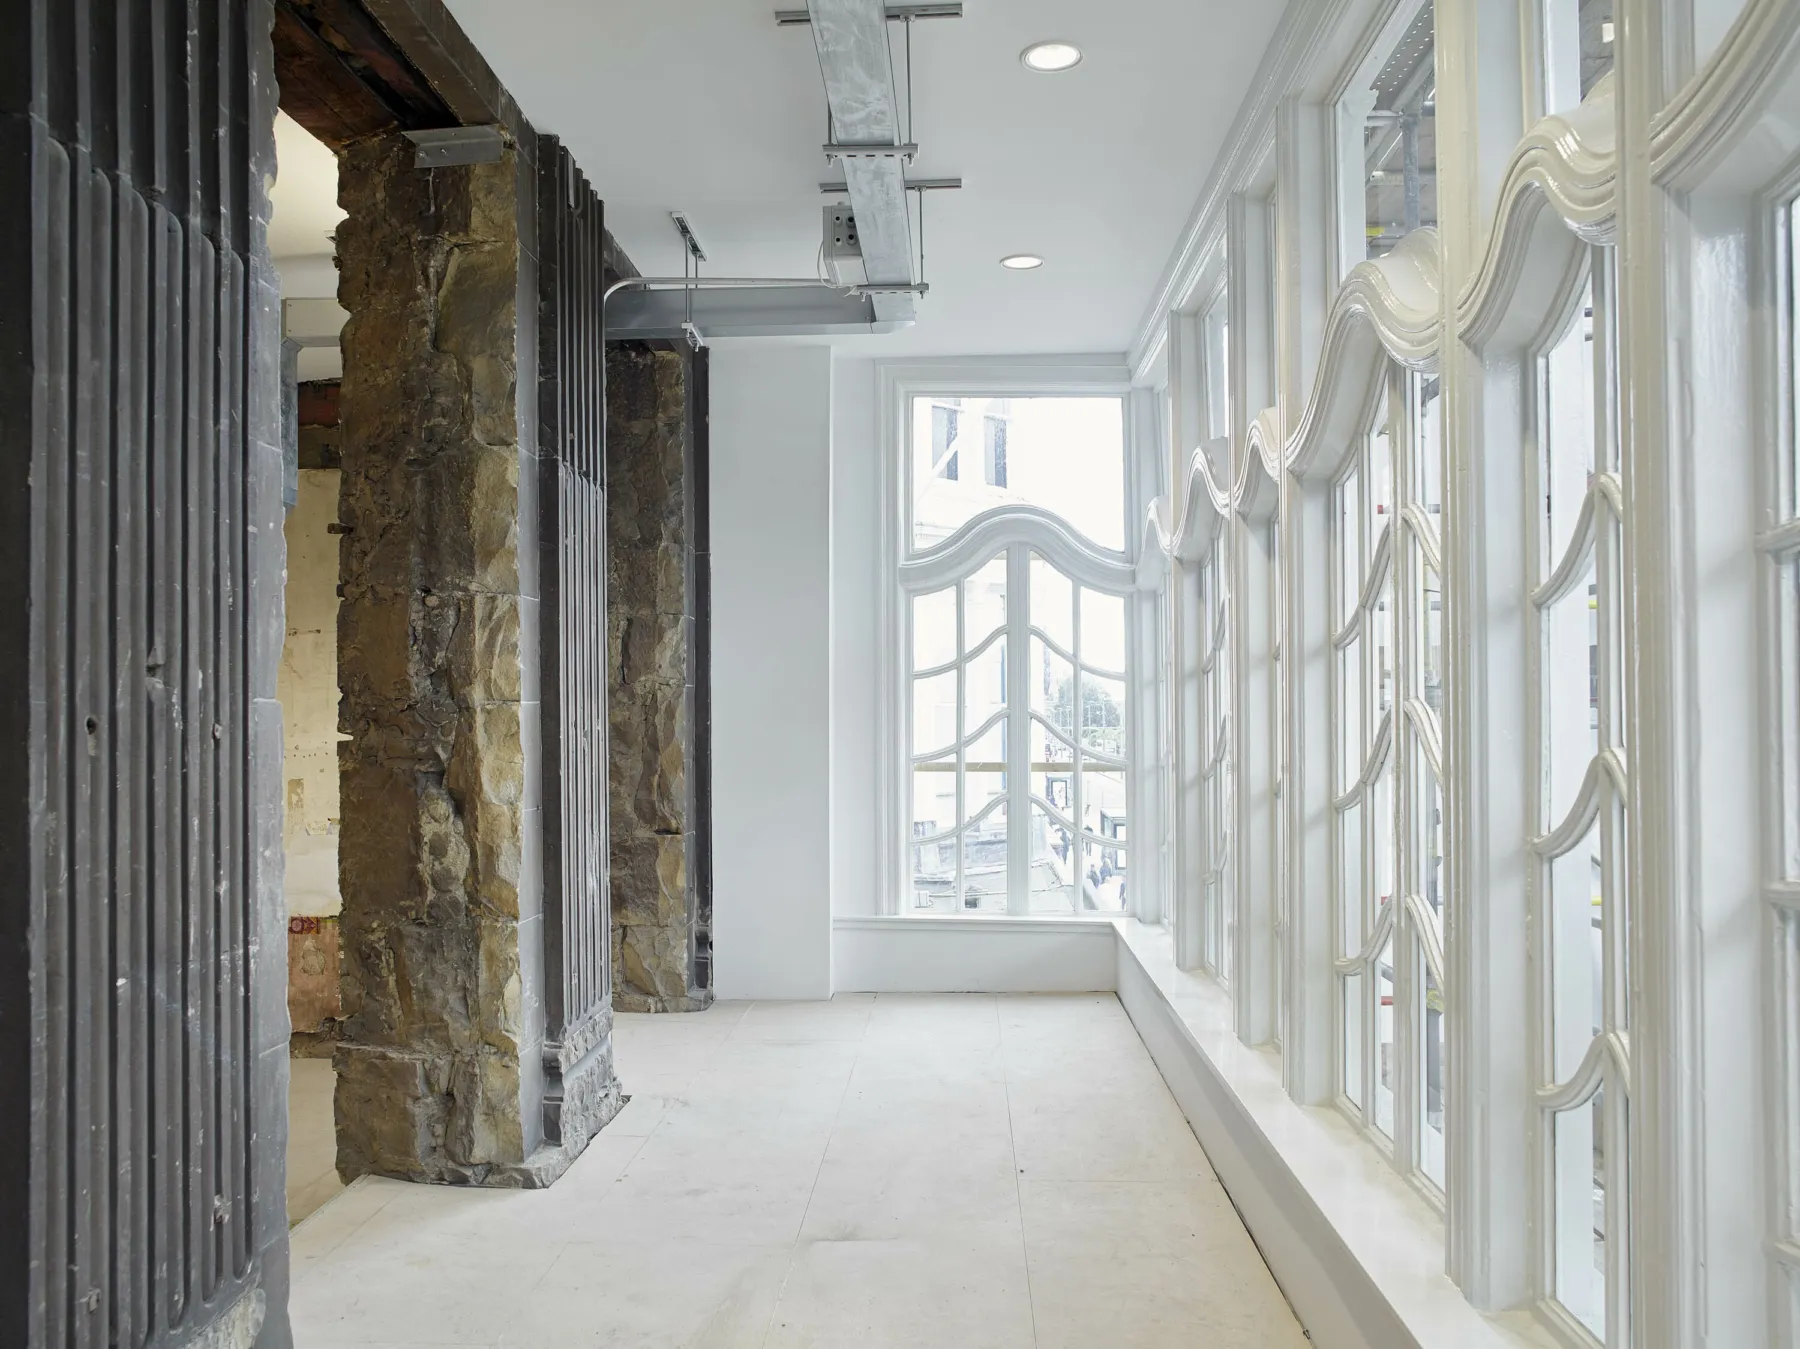 Interior view of defurbished office in listed building, Edinburgh. Exposed stone contrasts with complex, timber window frames.